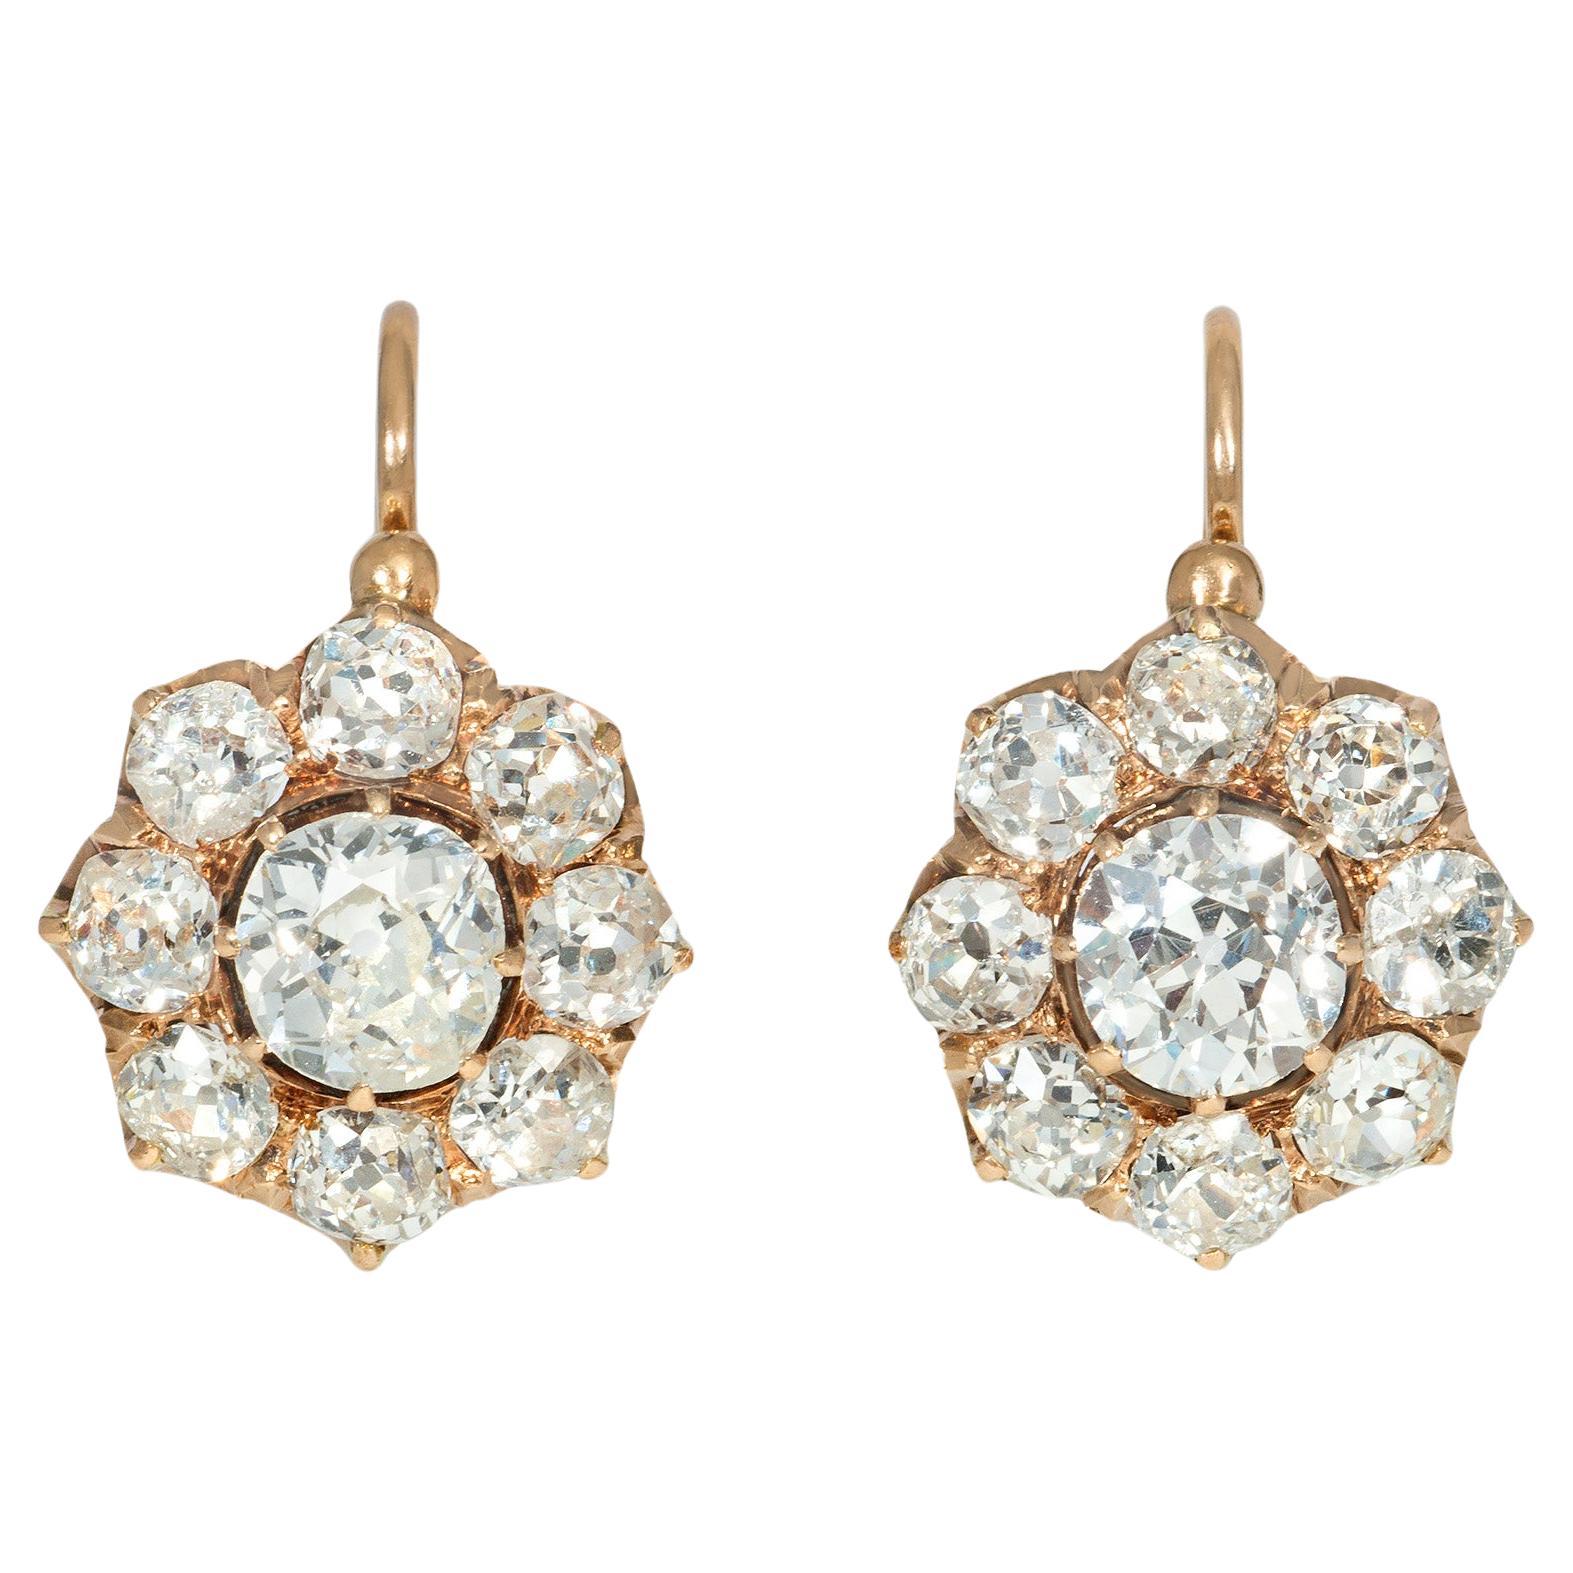 Antique Gold and Old Mine Cut Diamond Flower Cluster Earrings